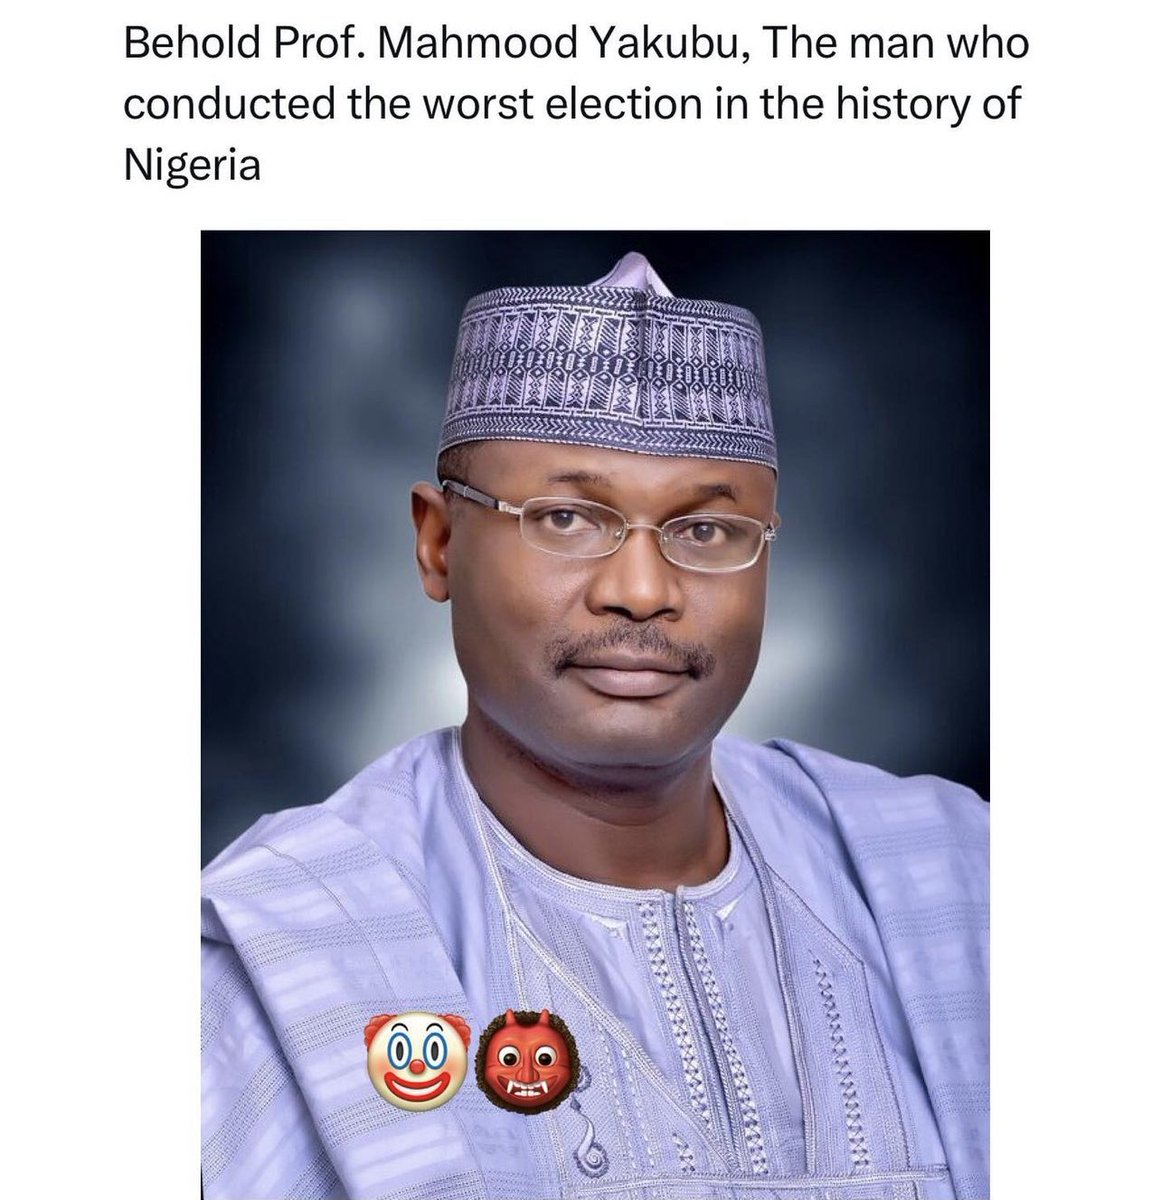 Behold Prof. Mahmood Yakubu, The man who conducted the worst election in the history of Nigeria! Shame on him and the entire @inecnigeria 👎🏾👎🏾👎🏾👎🏾